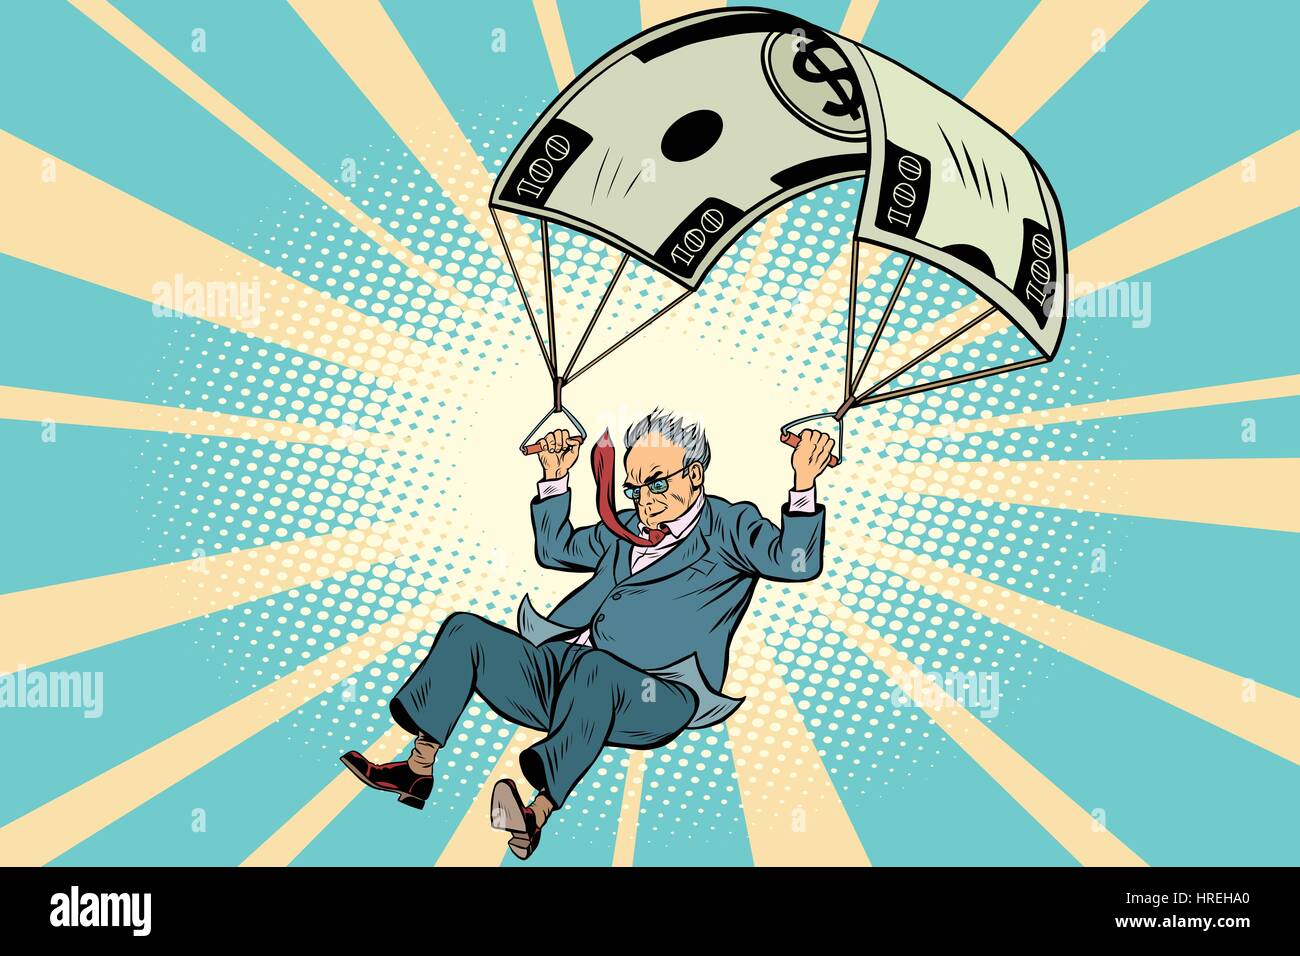 Retired Golden parachute financial compensation in the business. Comic book vintage pop art retro style illustration vector Stock Vector